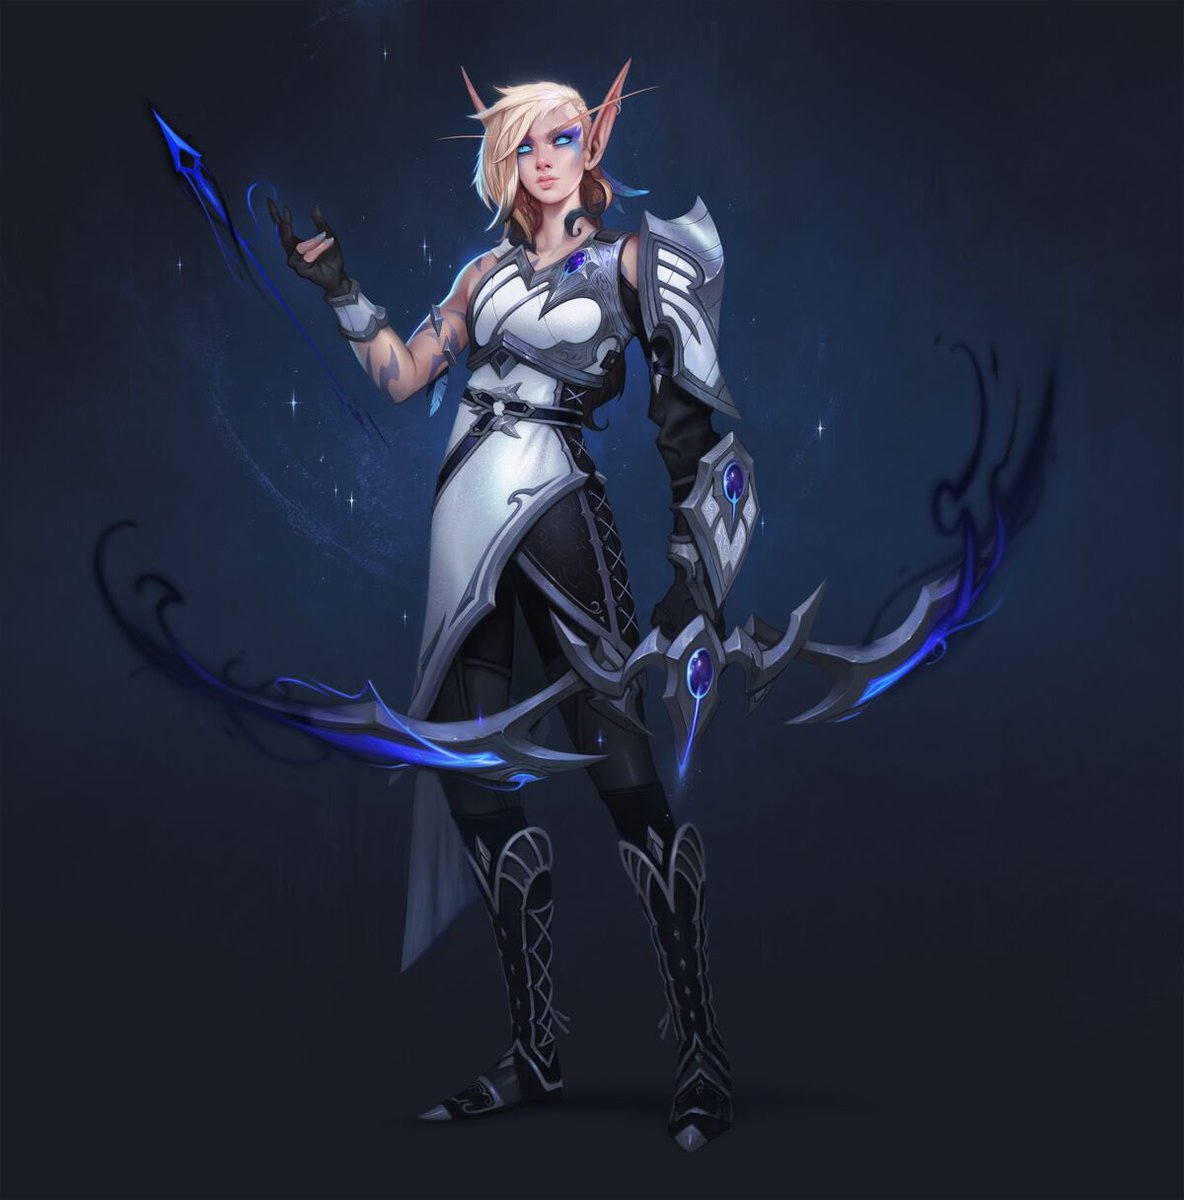 I literally cannot WAIT to see her model this week (if its datamined with Alpha). She's serving Void and High Elven realness! 💖😭 Her bow?? The soft stars around her!? PERFECTION!